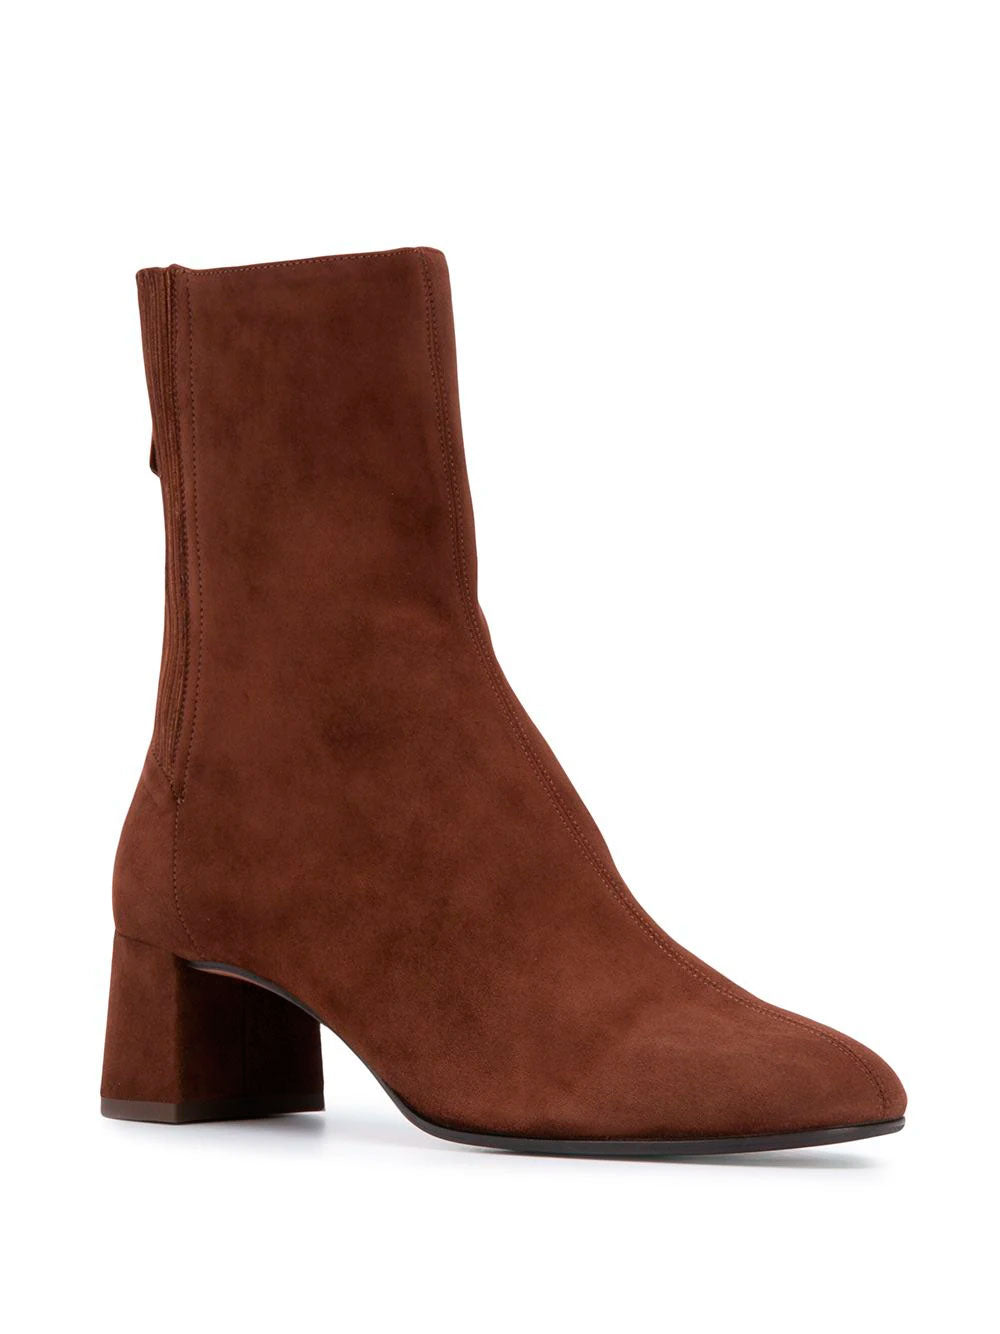 Saint Honore ankle boots